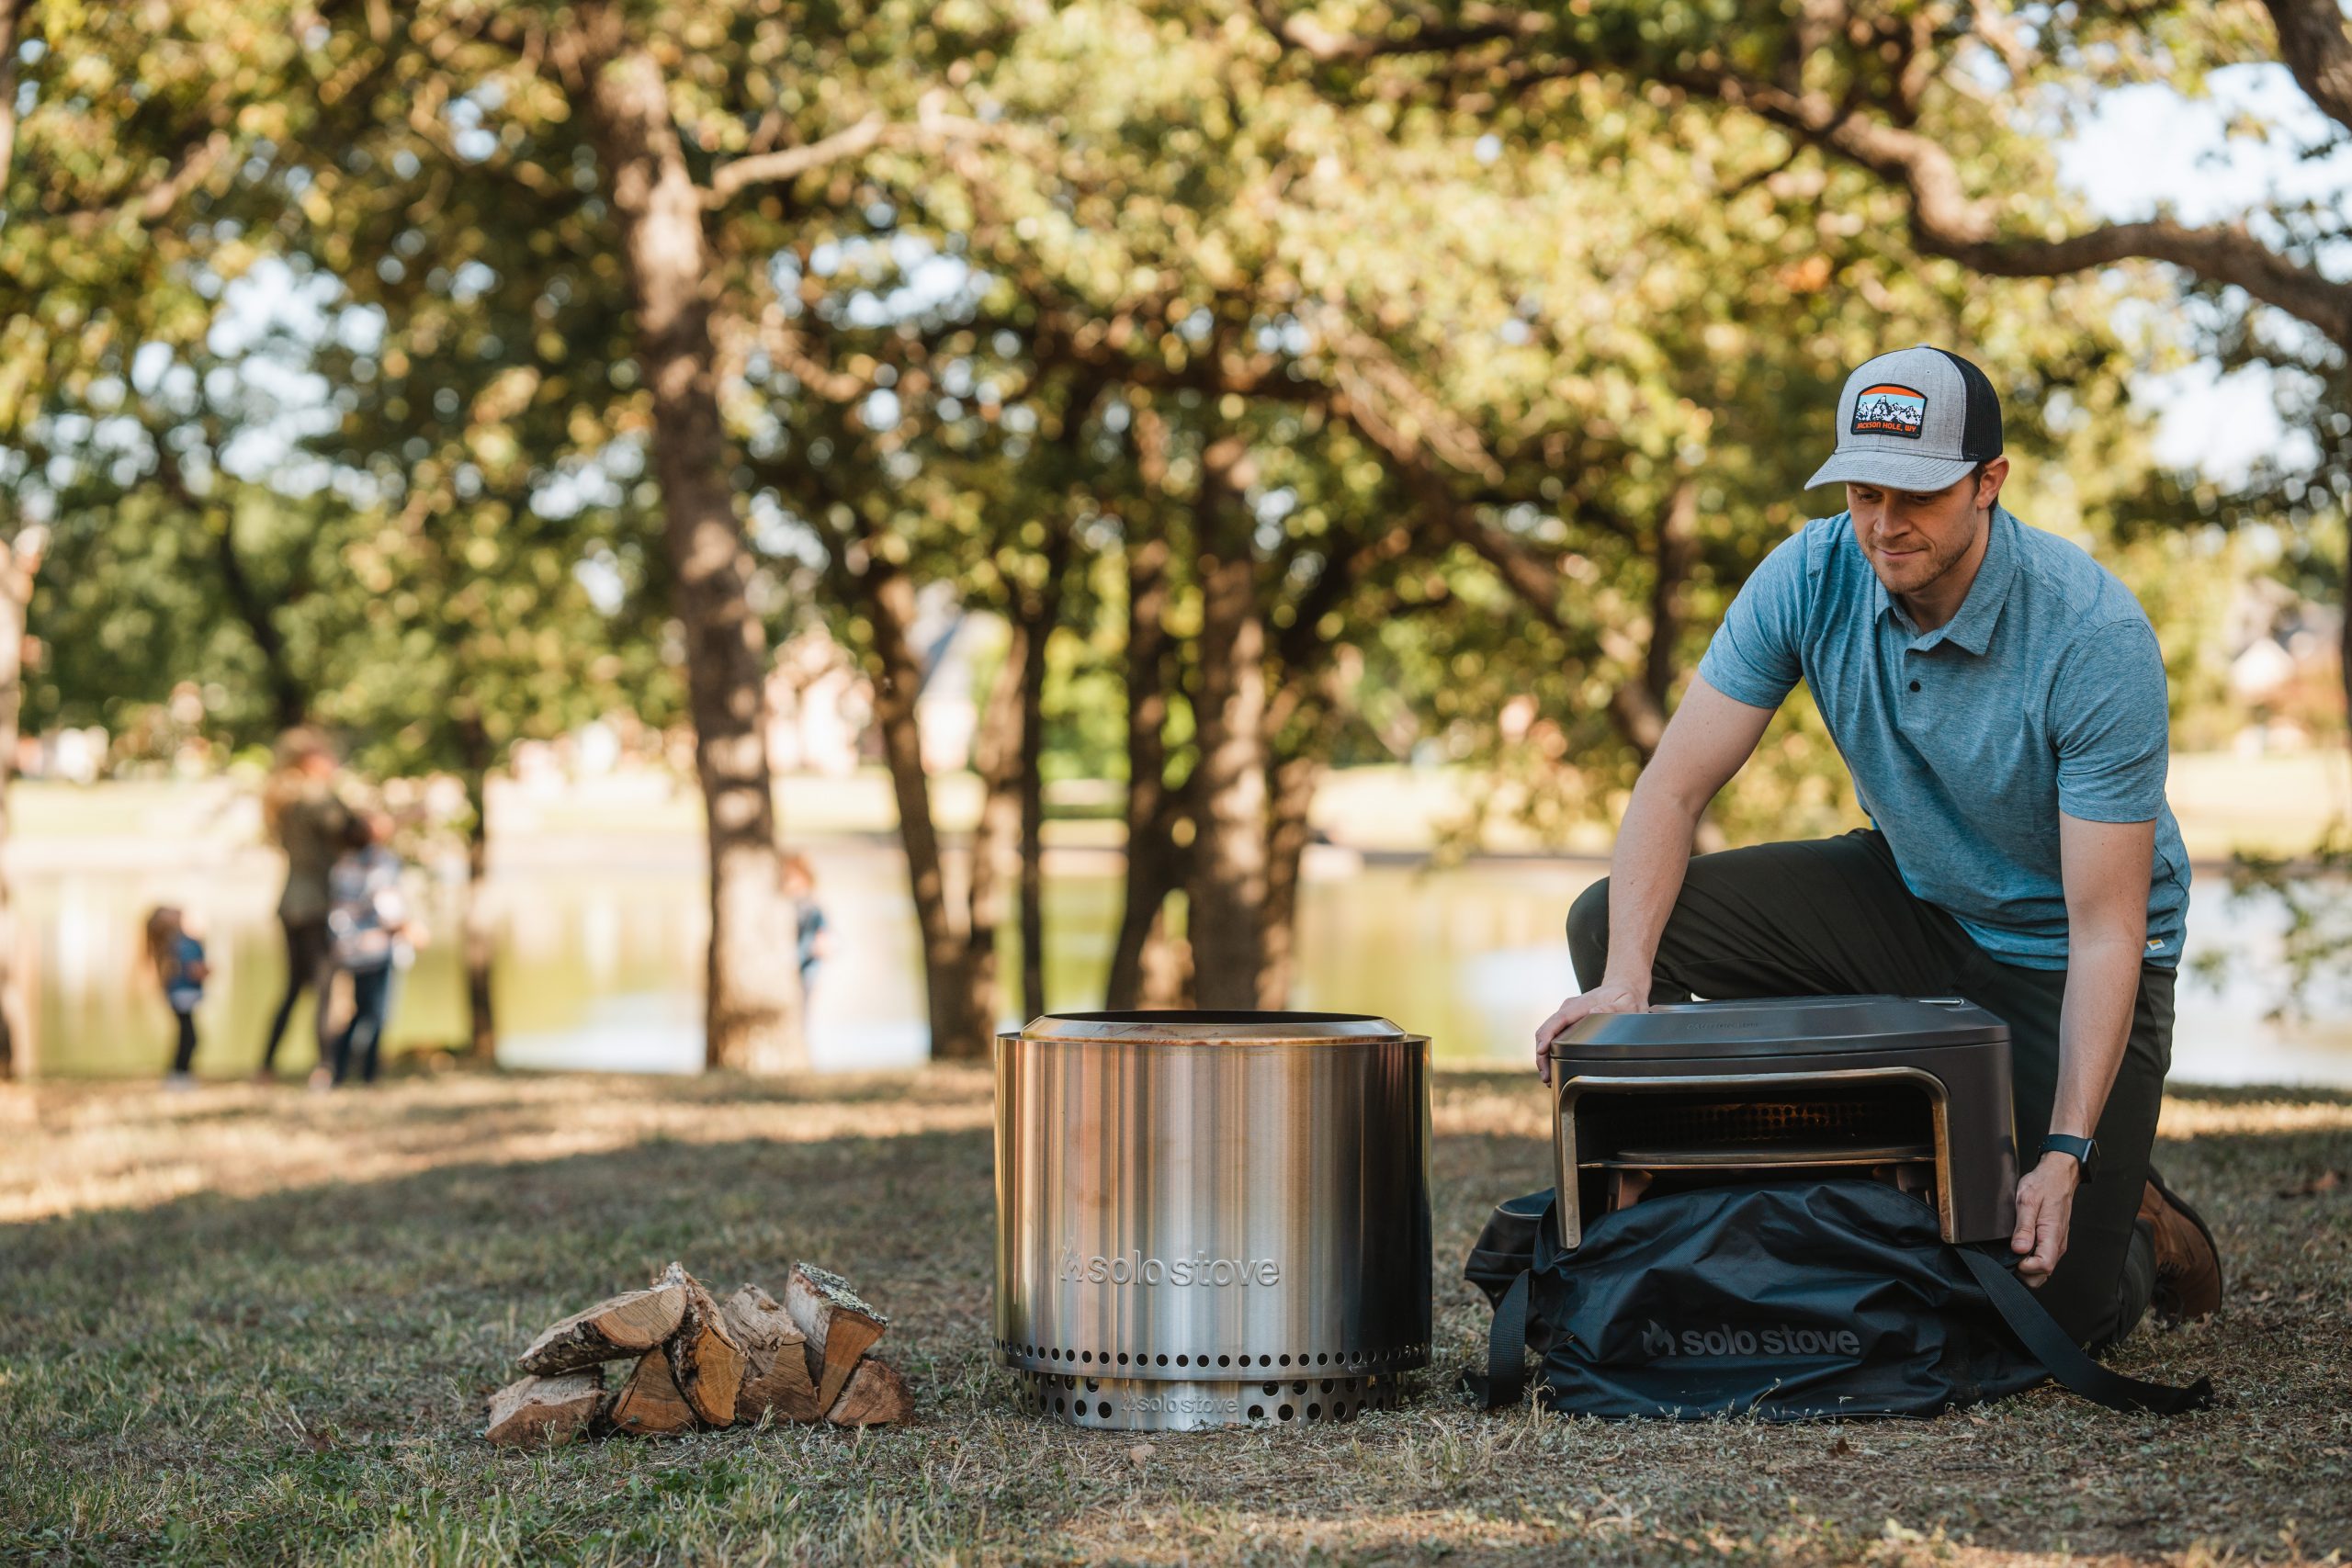 Solostove's Pi Fire Pizza Ovens For Your Solostove Fire Pit